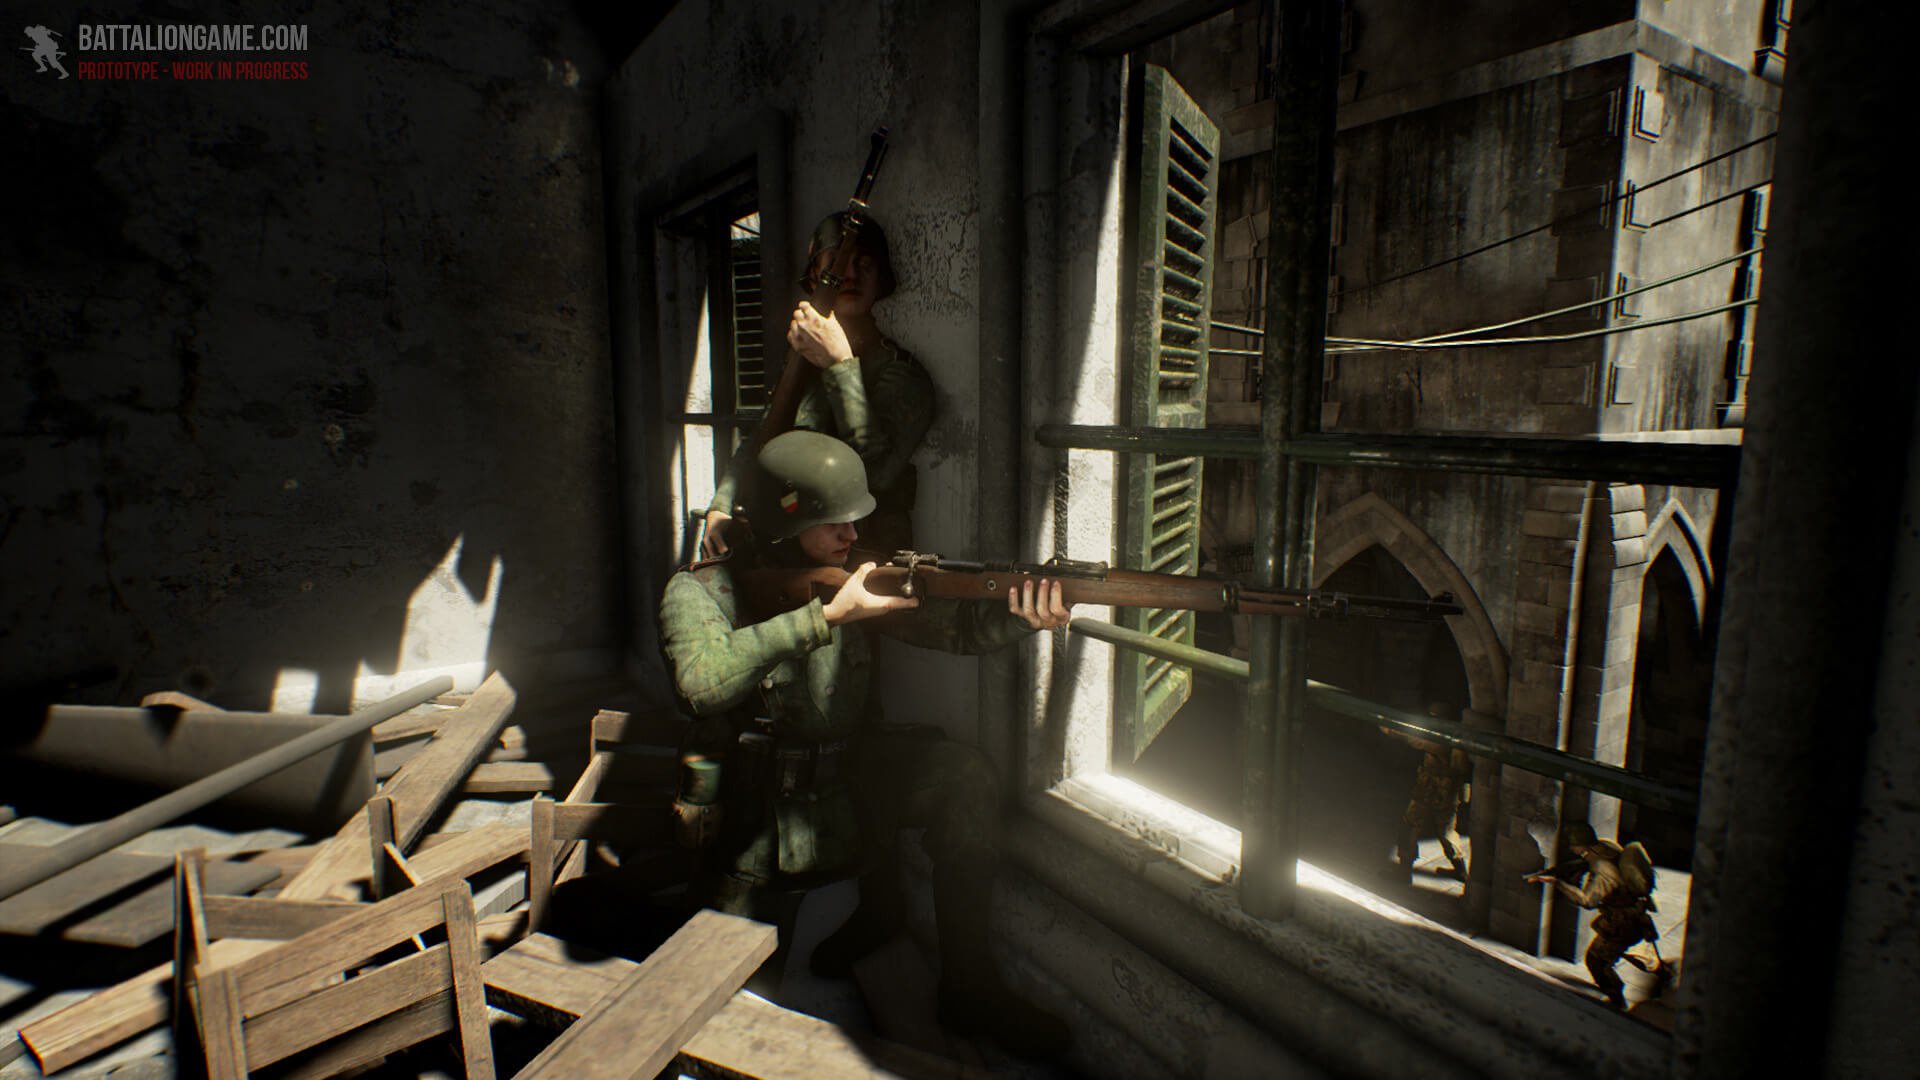 Battalion 1944 will bring WW2 action to Steam Early Access on February 1